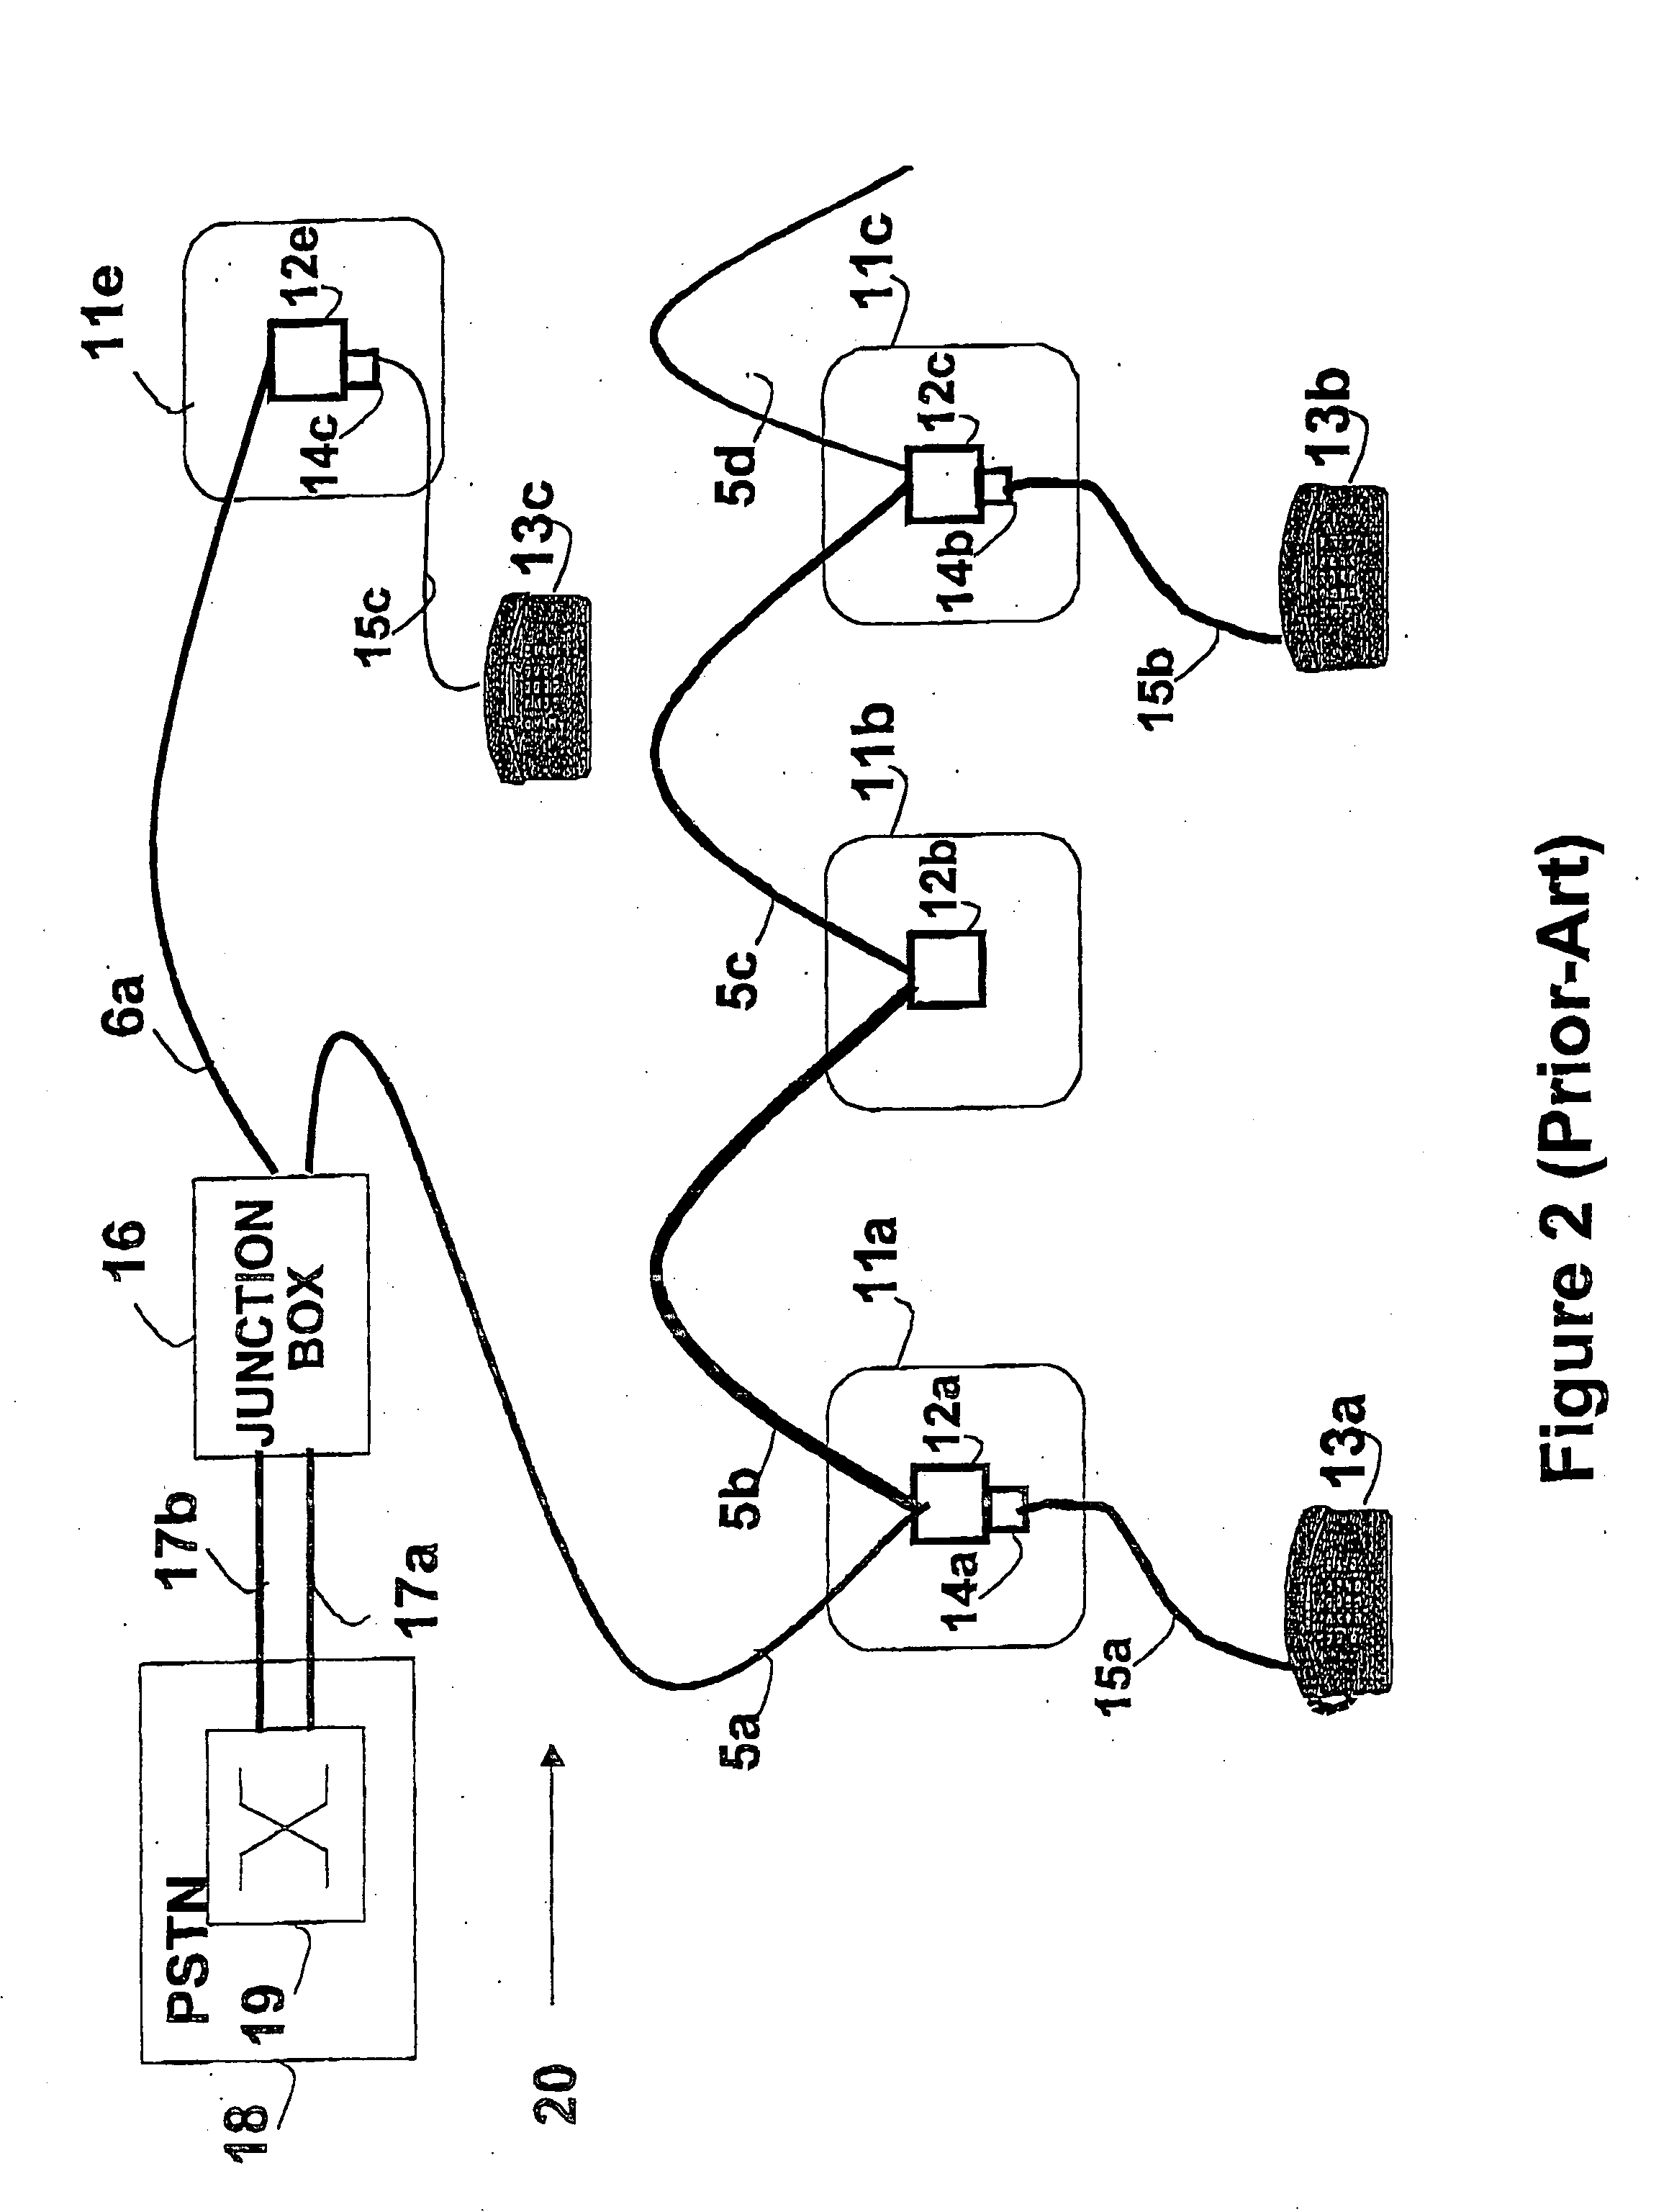 Telephone communication system over a single telephone line